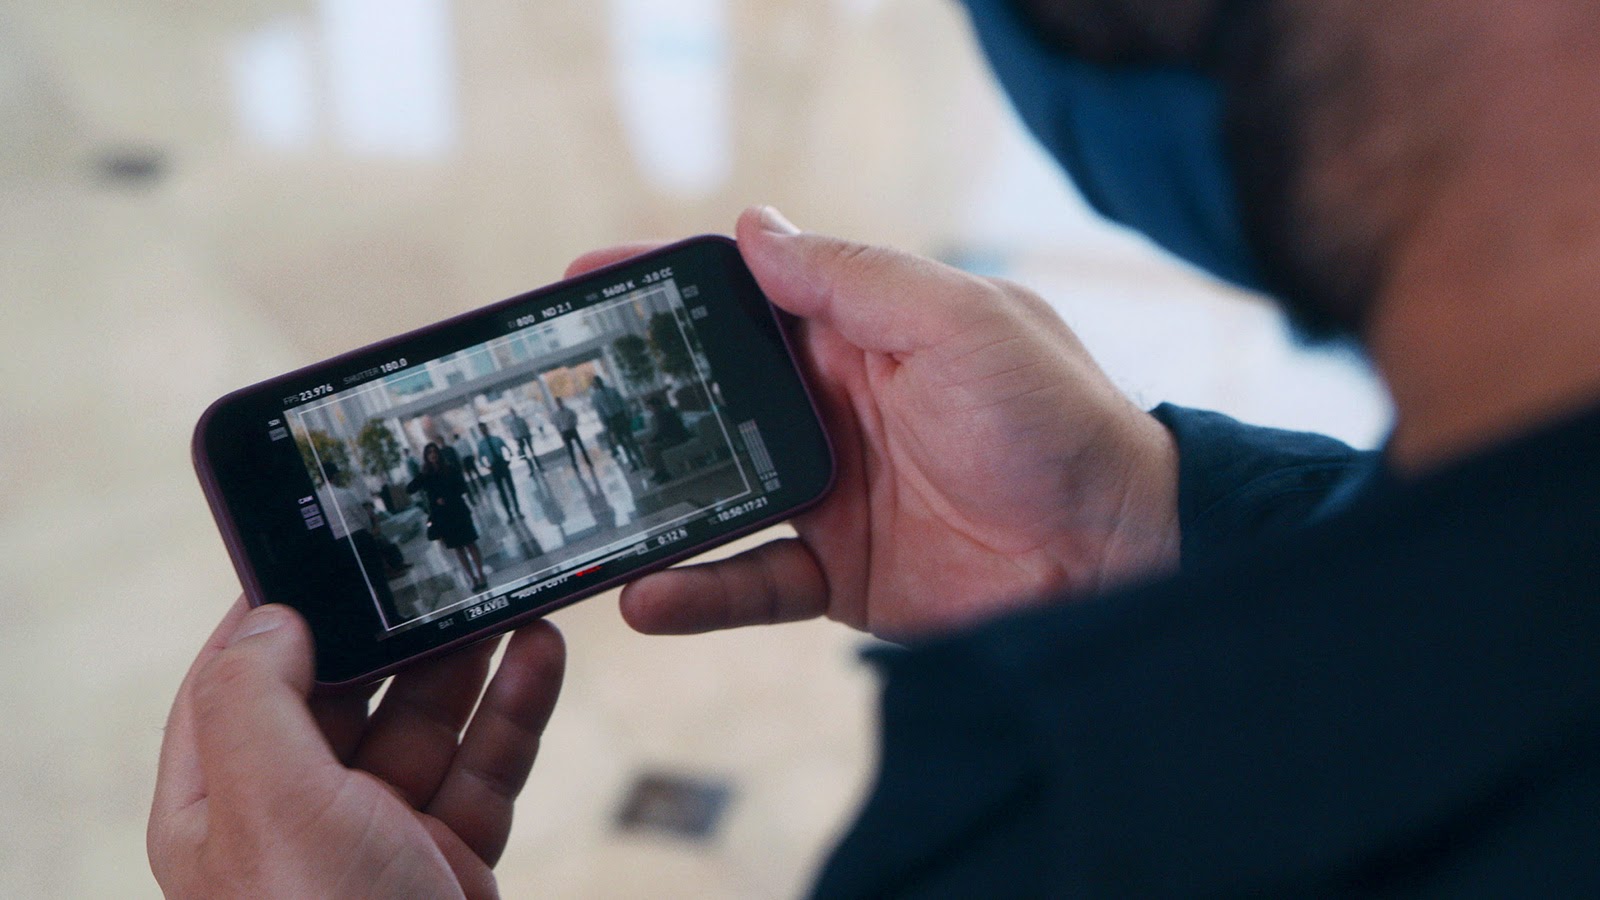 C2C allows the director to check the take on a smartphone